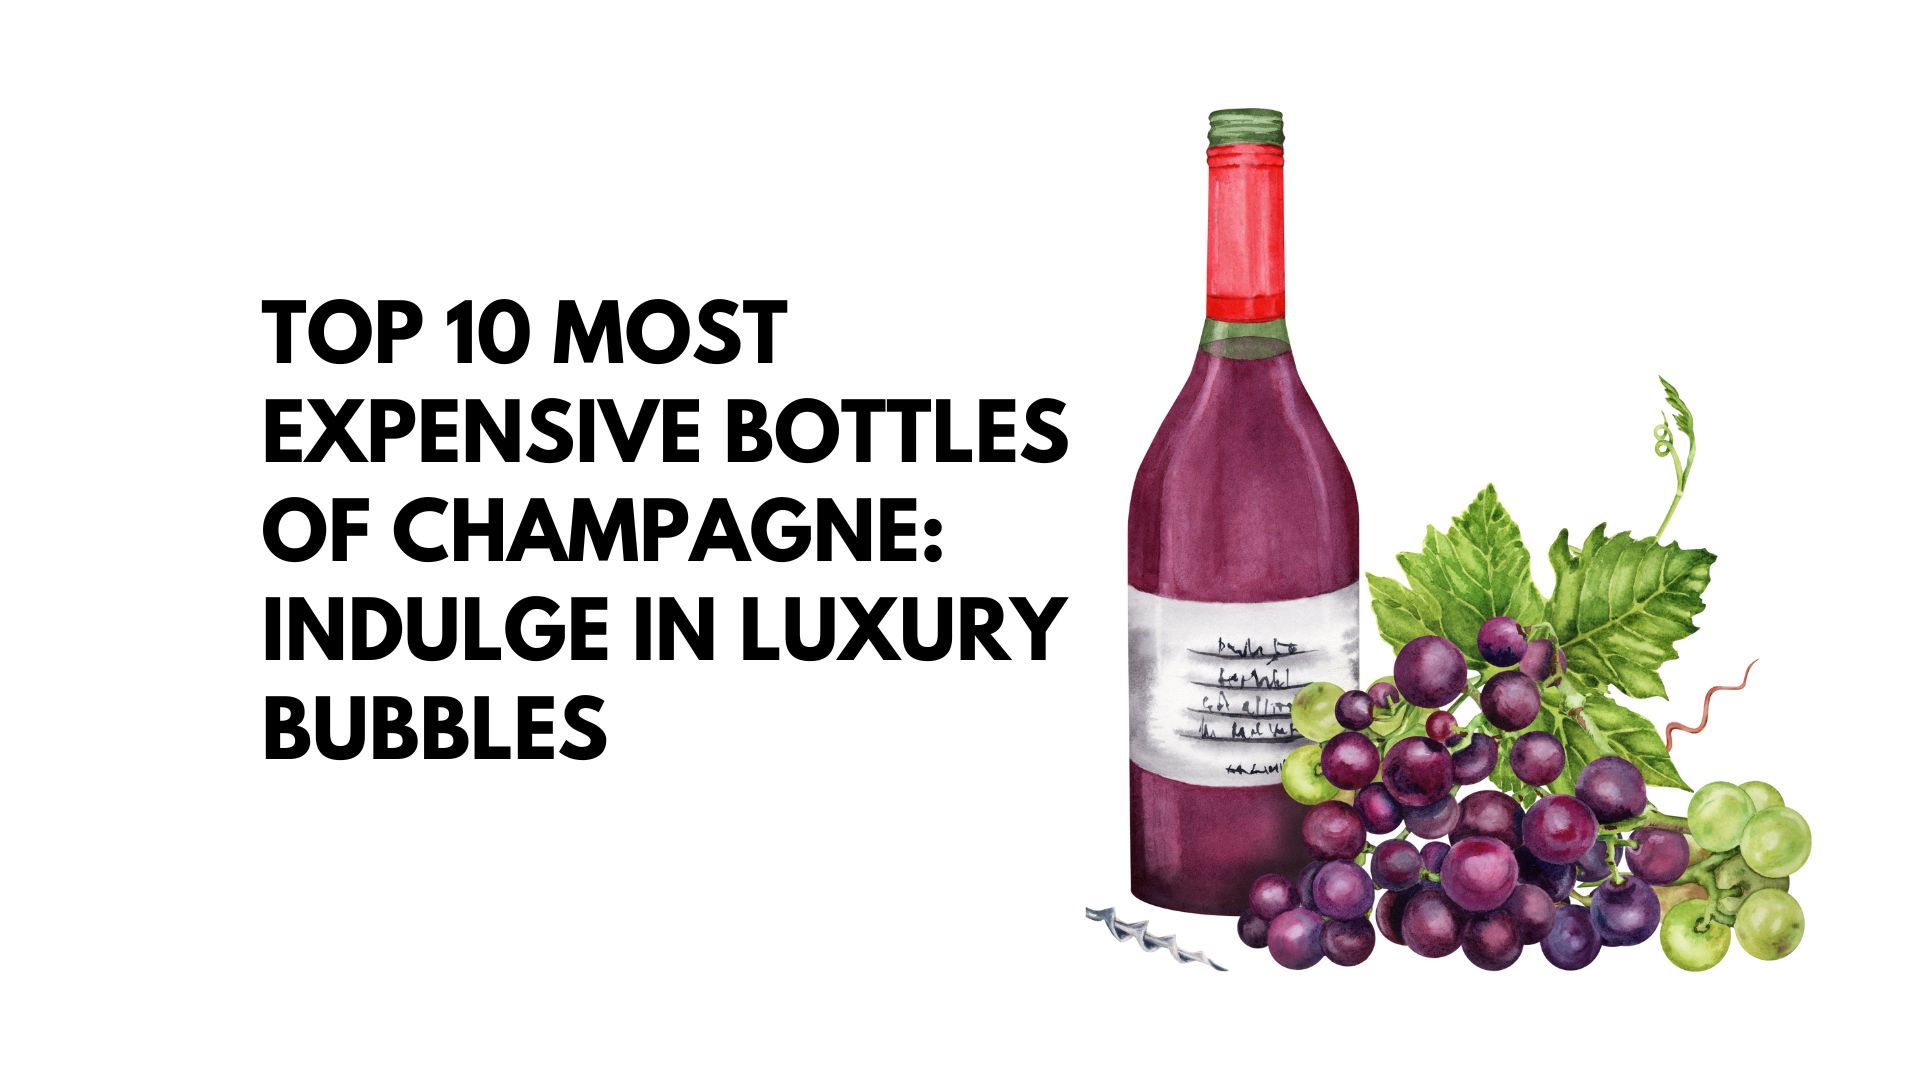 Top 10 Most Expensive Bottles of Champagne: Indulge in Luxury Bubbles